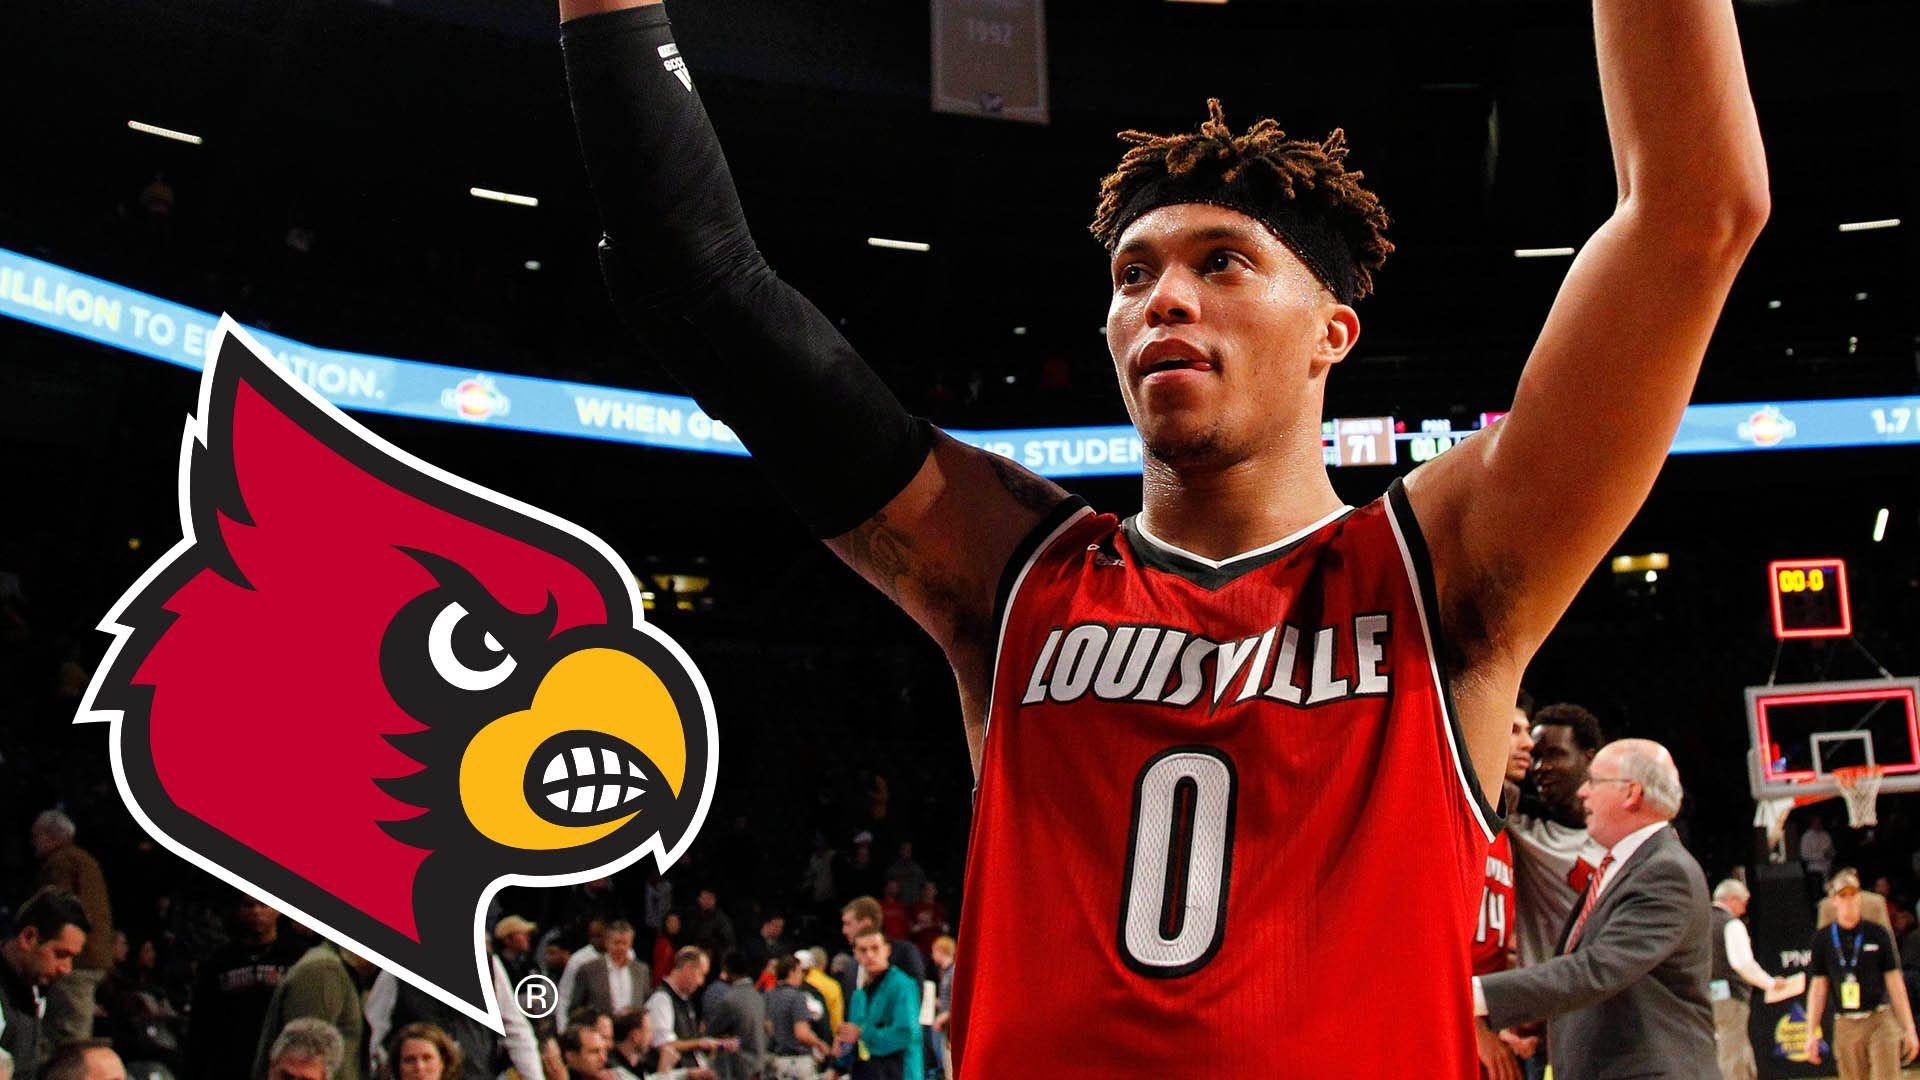 Louisville's Damion Lee: It's L1C4 Until The Day I Die